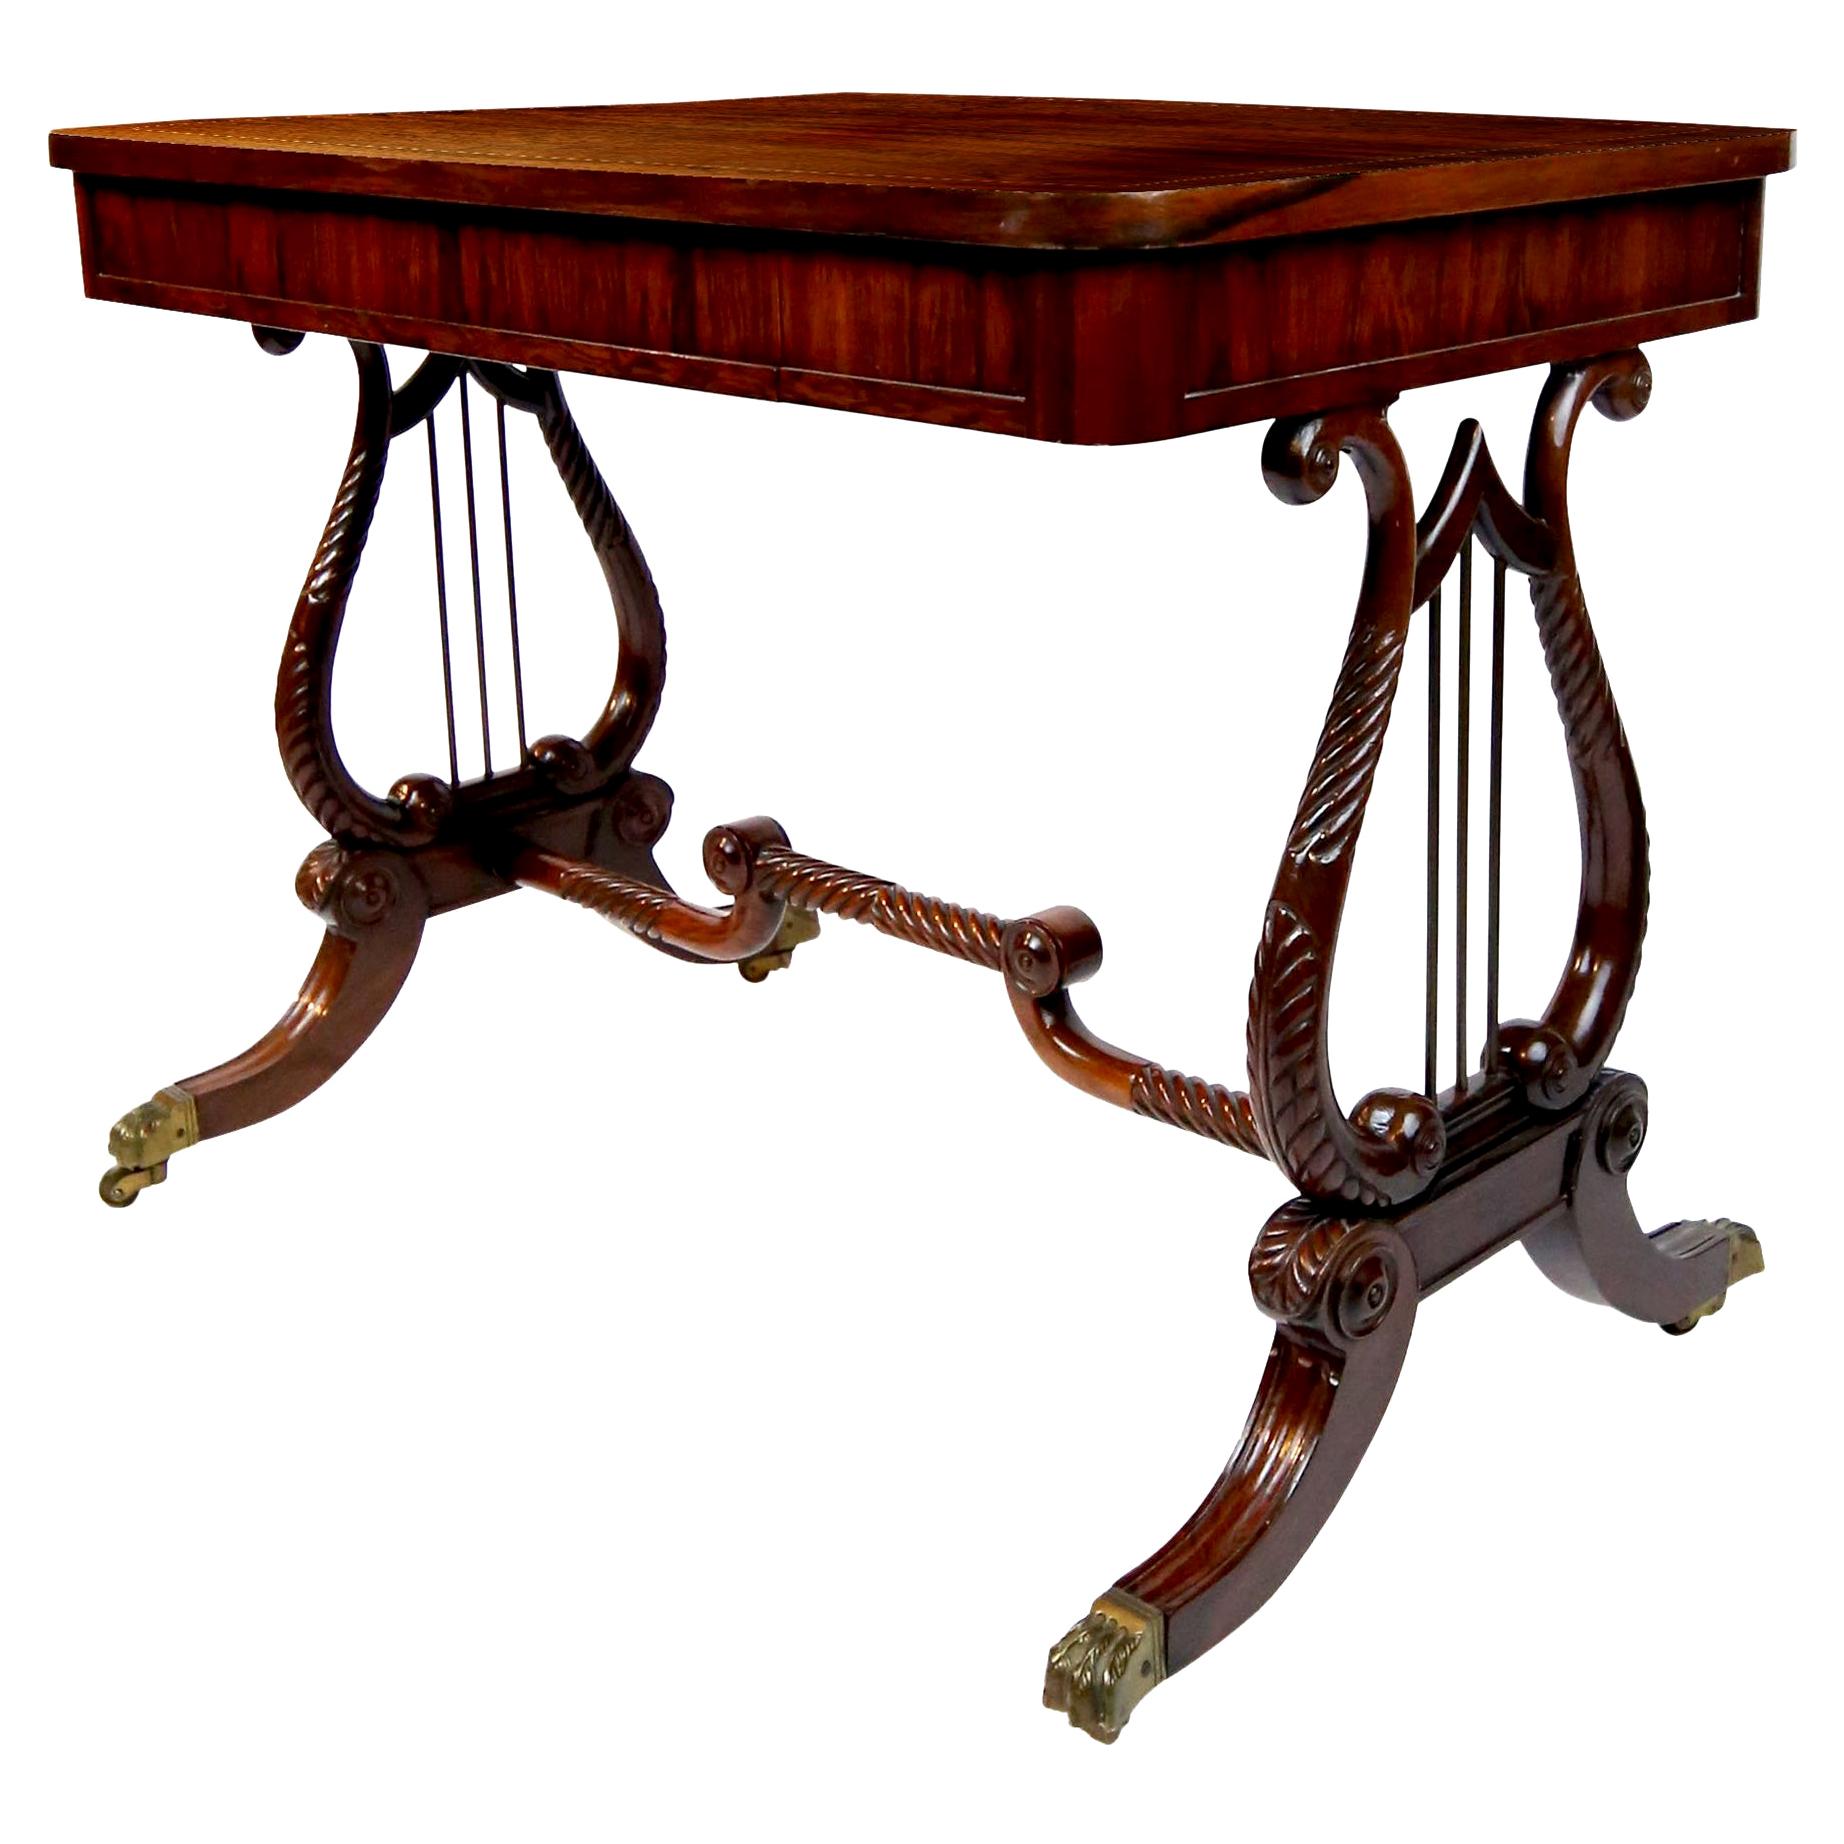 Regency Rosewood Library Table with Lyre Base